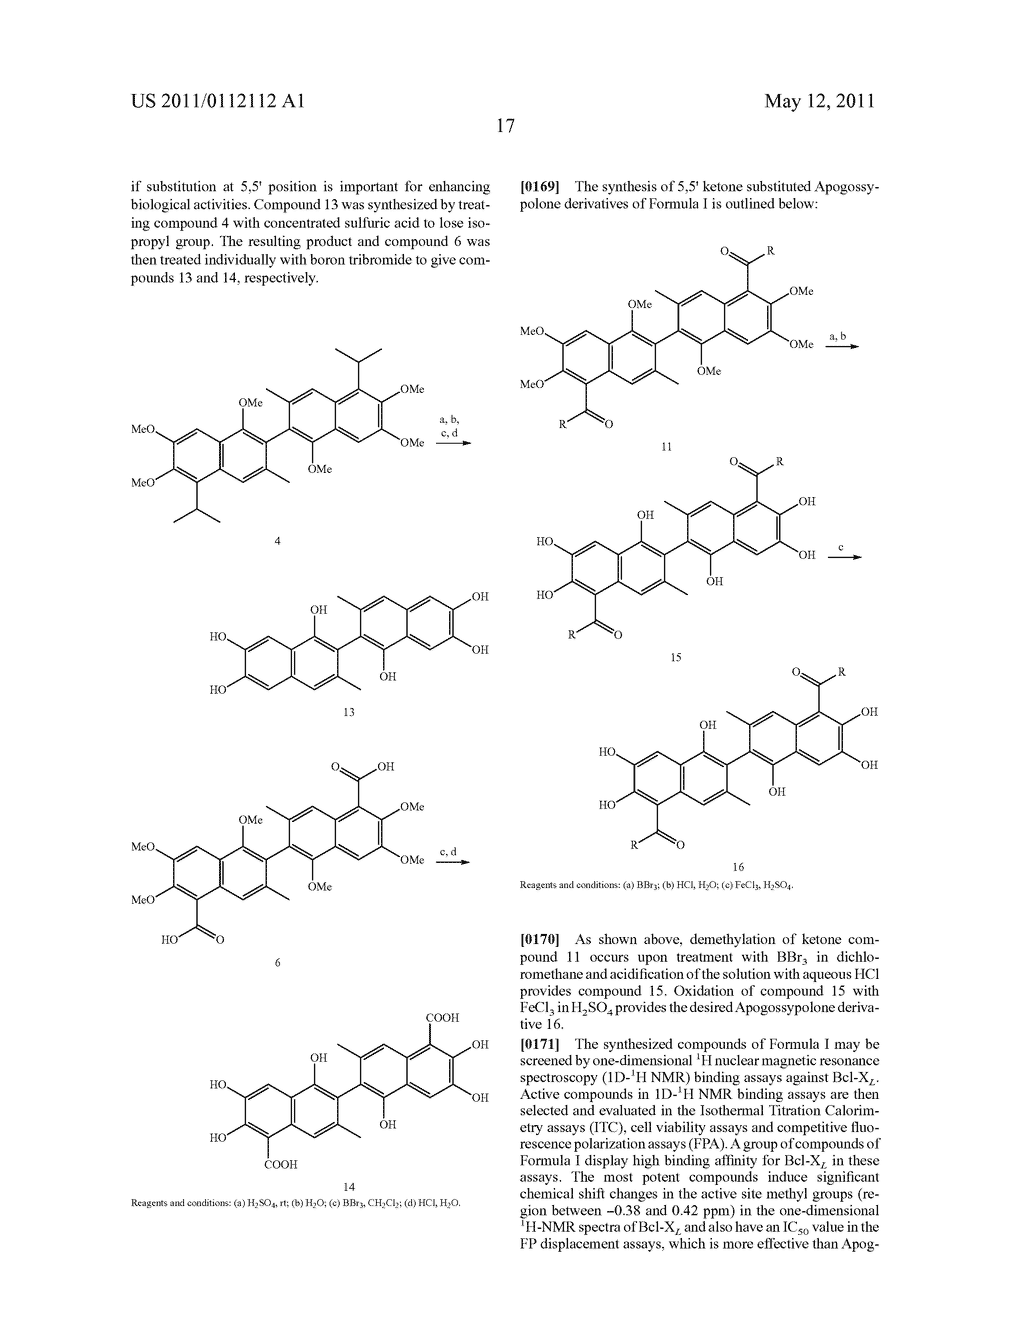 APOGOSSYPOLONE DERIVATIVES AS ANTICANCER AGENTS - diagram, schematic, and image 43